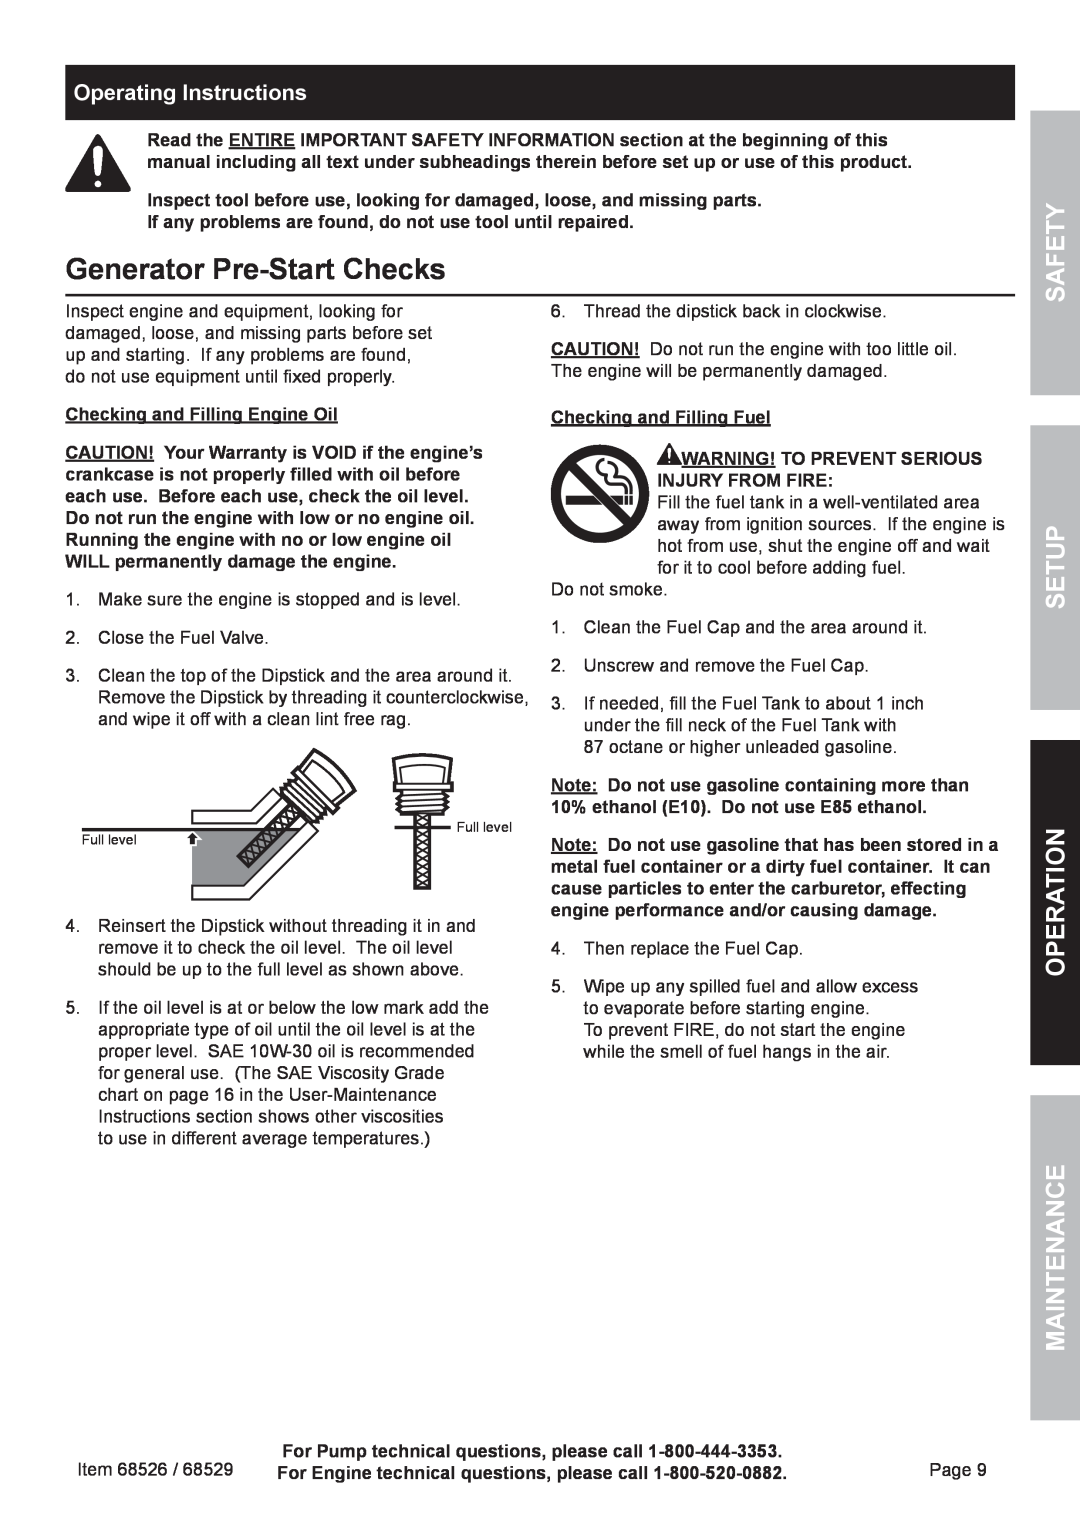 Harbor Freight Tools 68526 Generator Pre-StartChecks, Operating Instructions, Safety, Setup, Maintenance, Operation, Page 